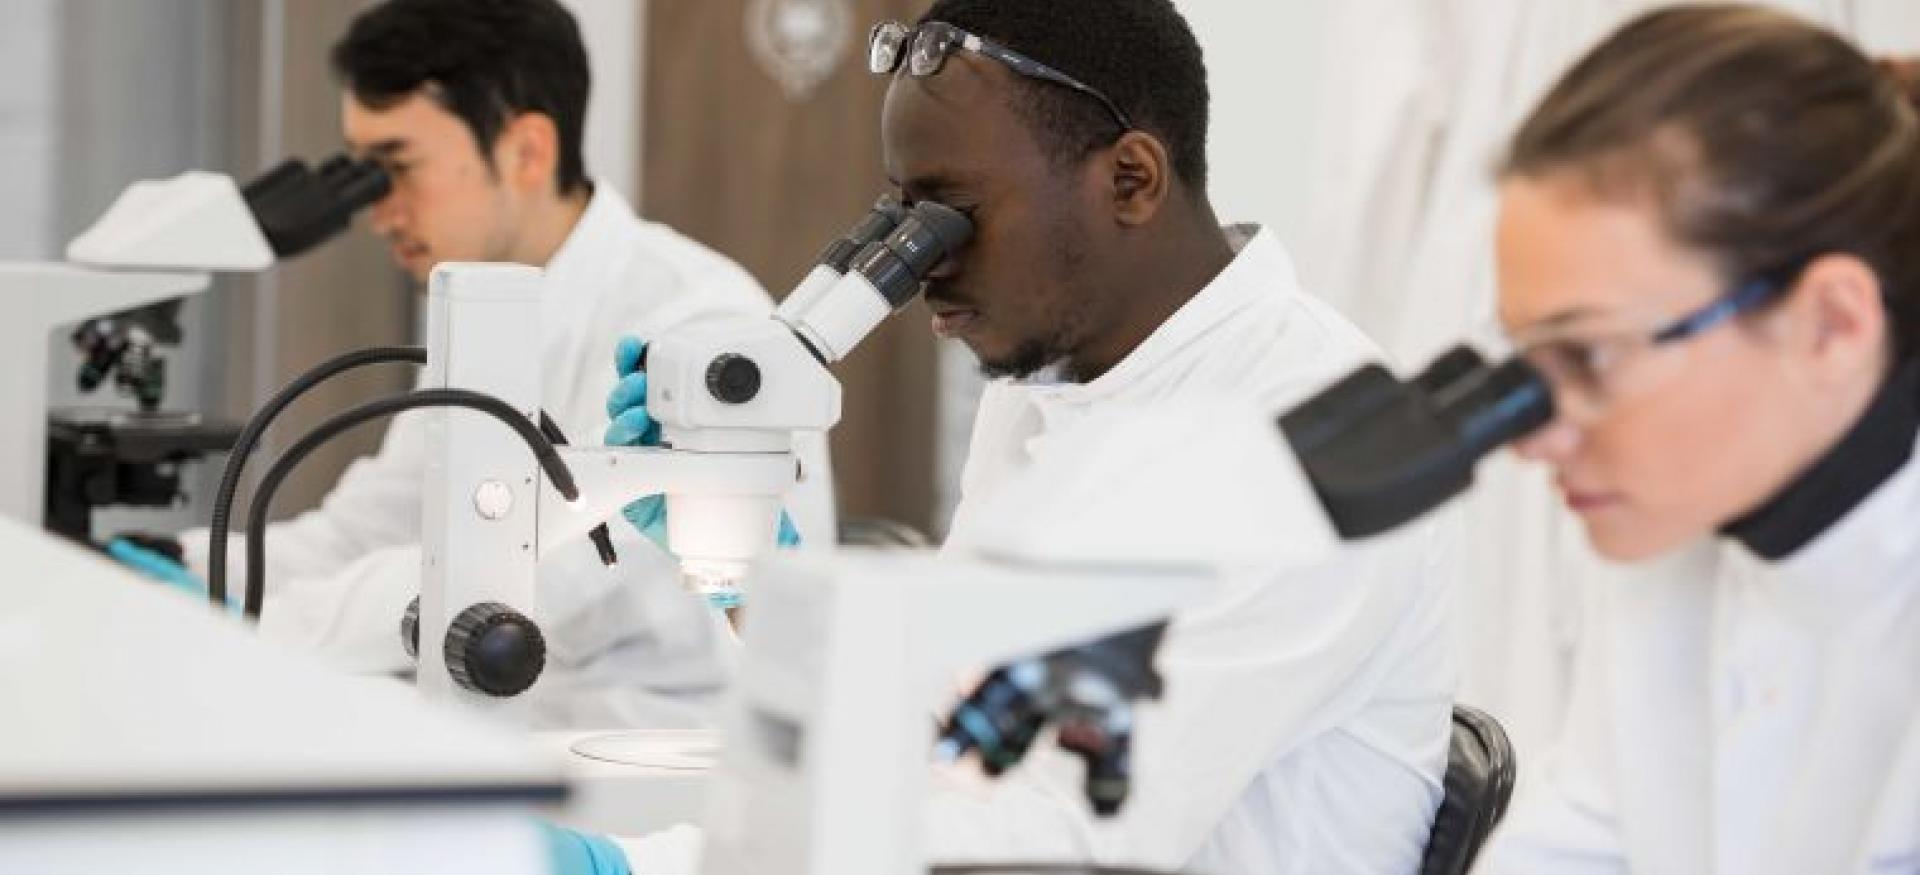 Three students in lab coats stand looking into microscopes.